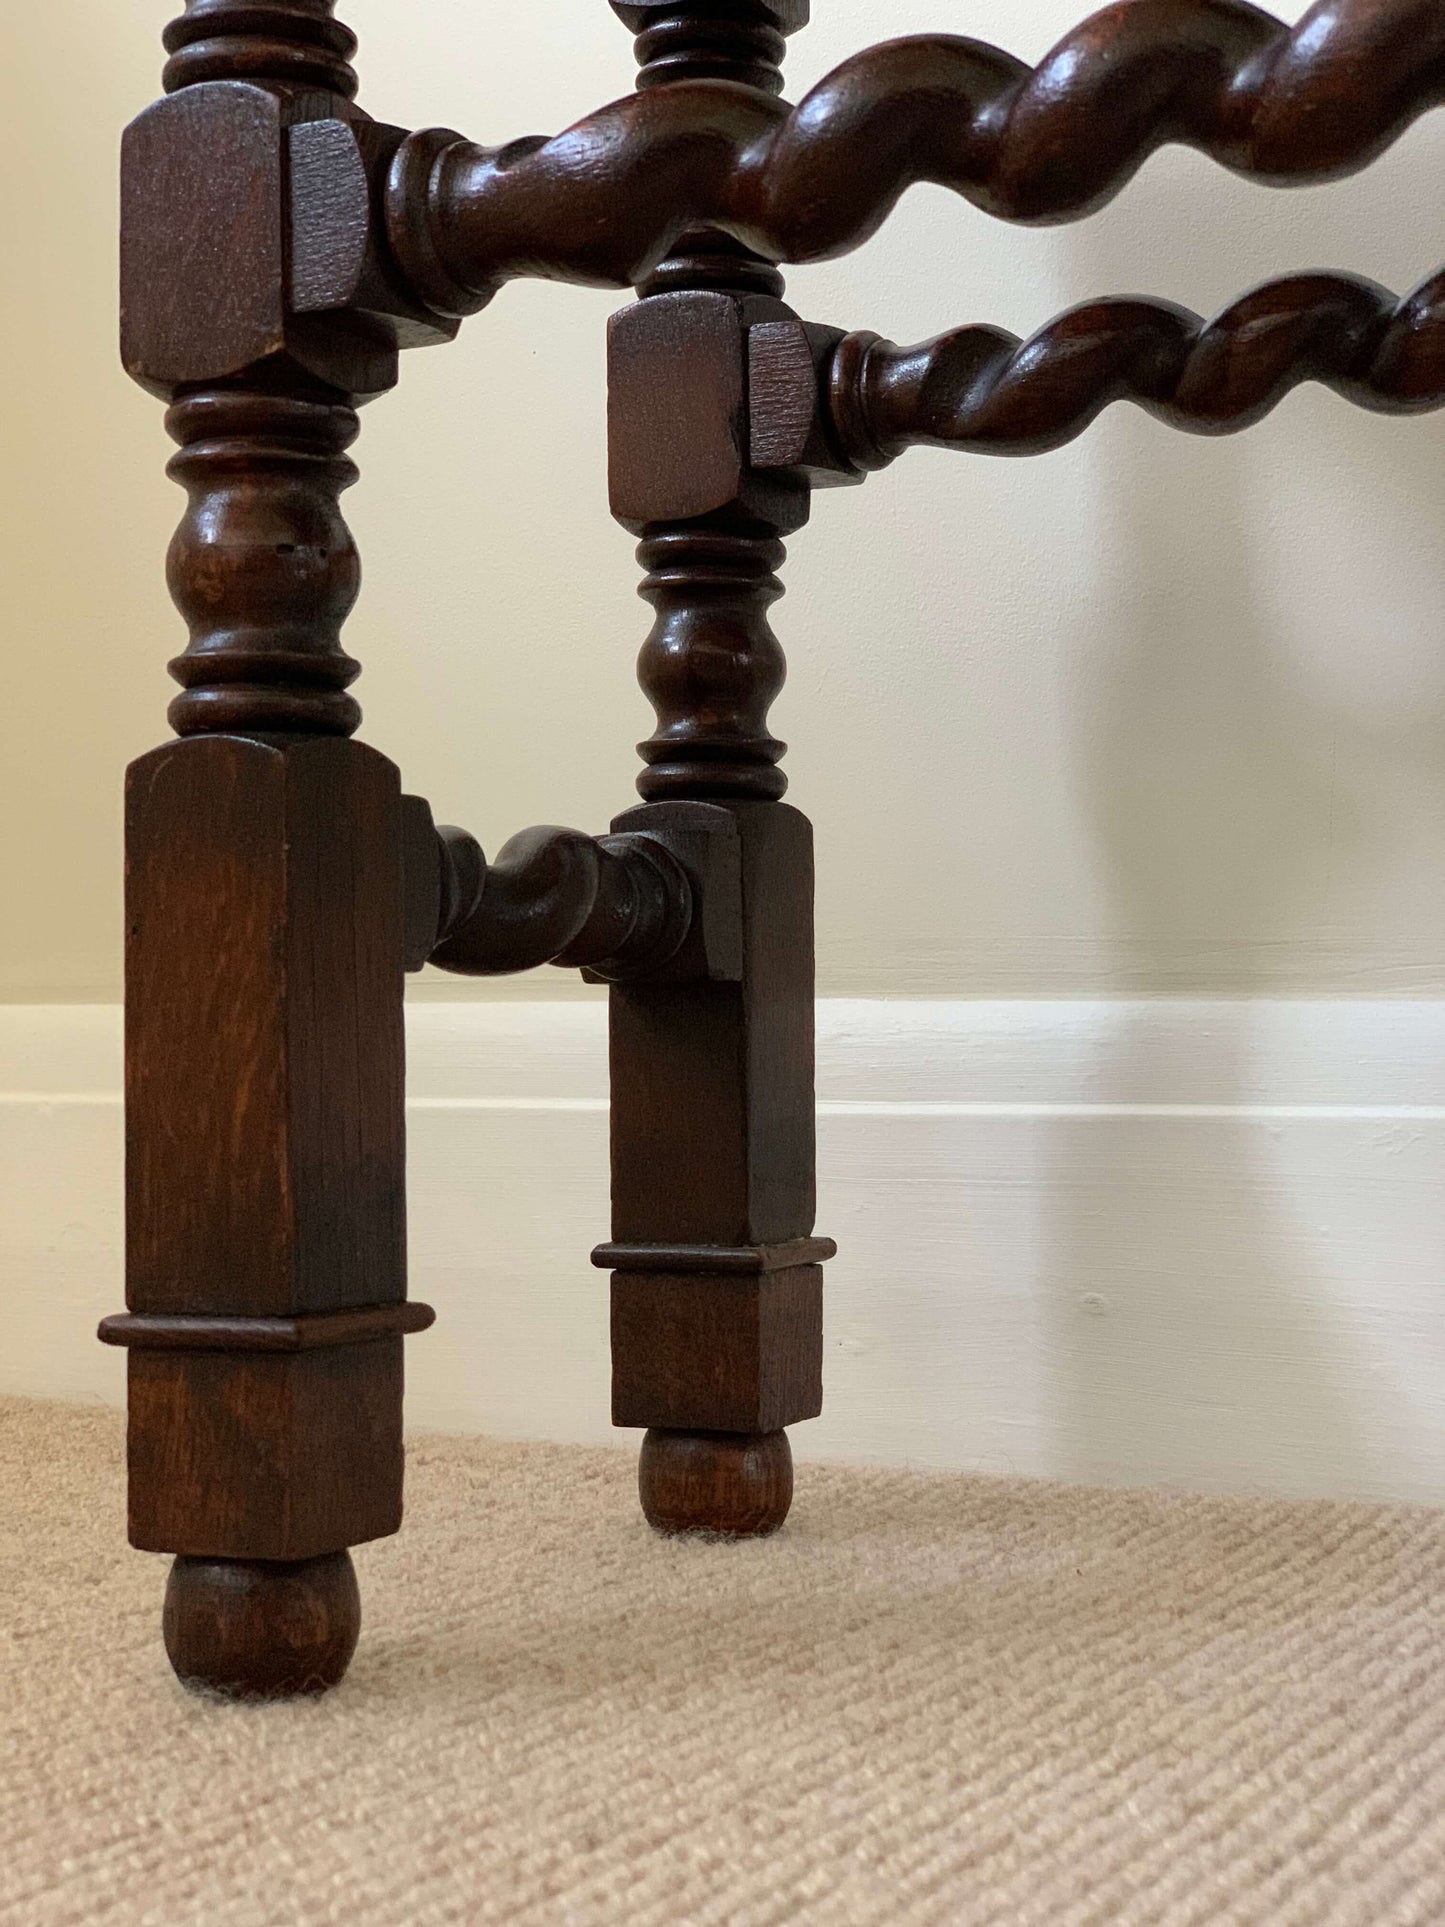 Antique cane stool with twisted detailing